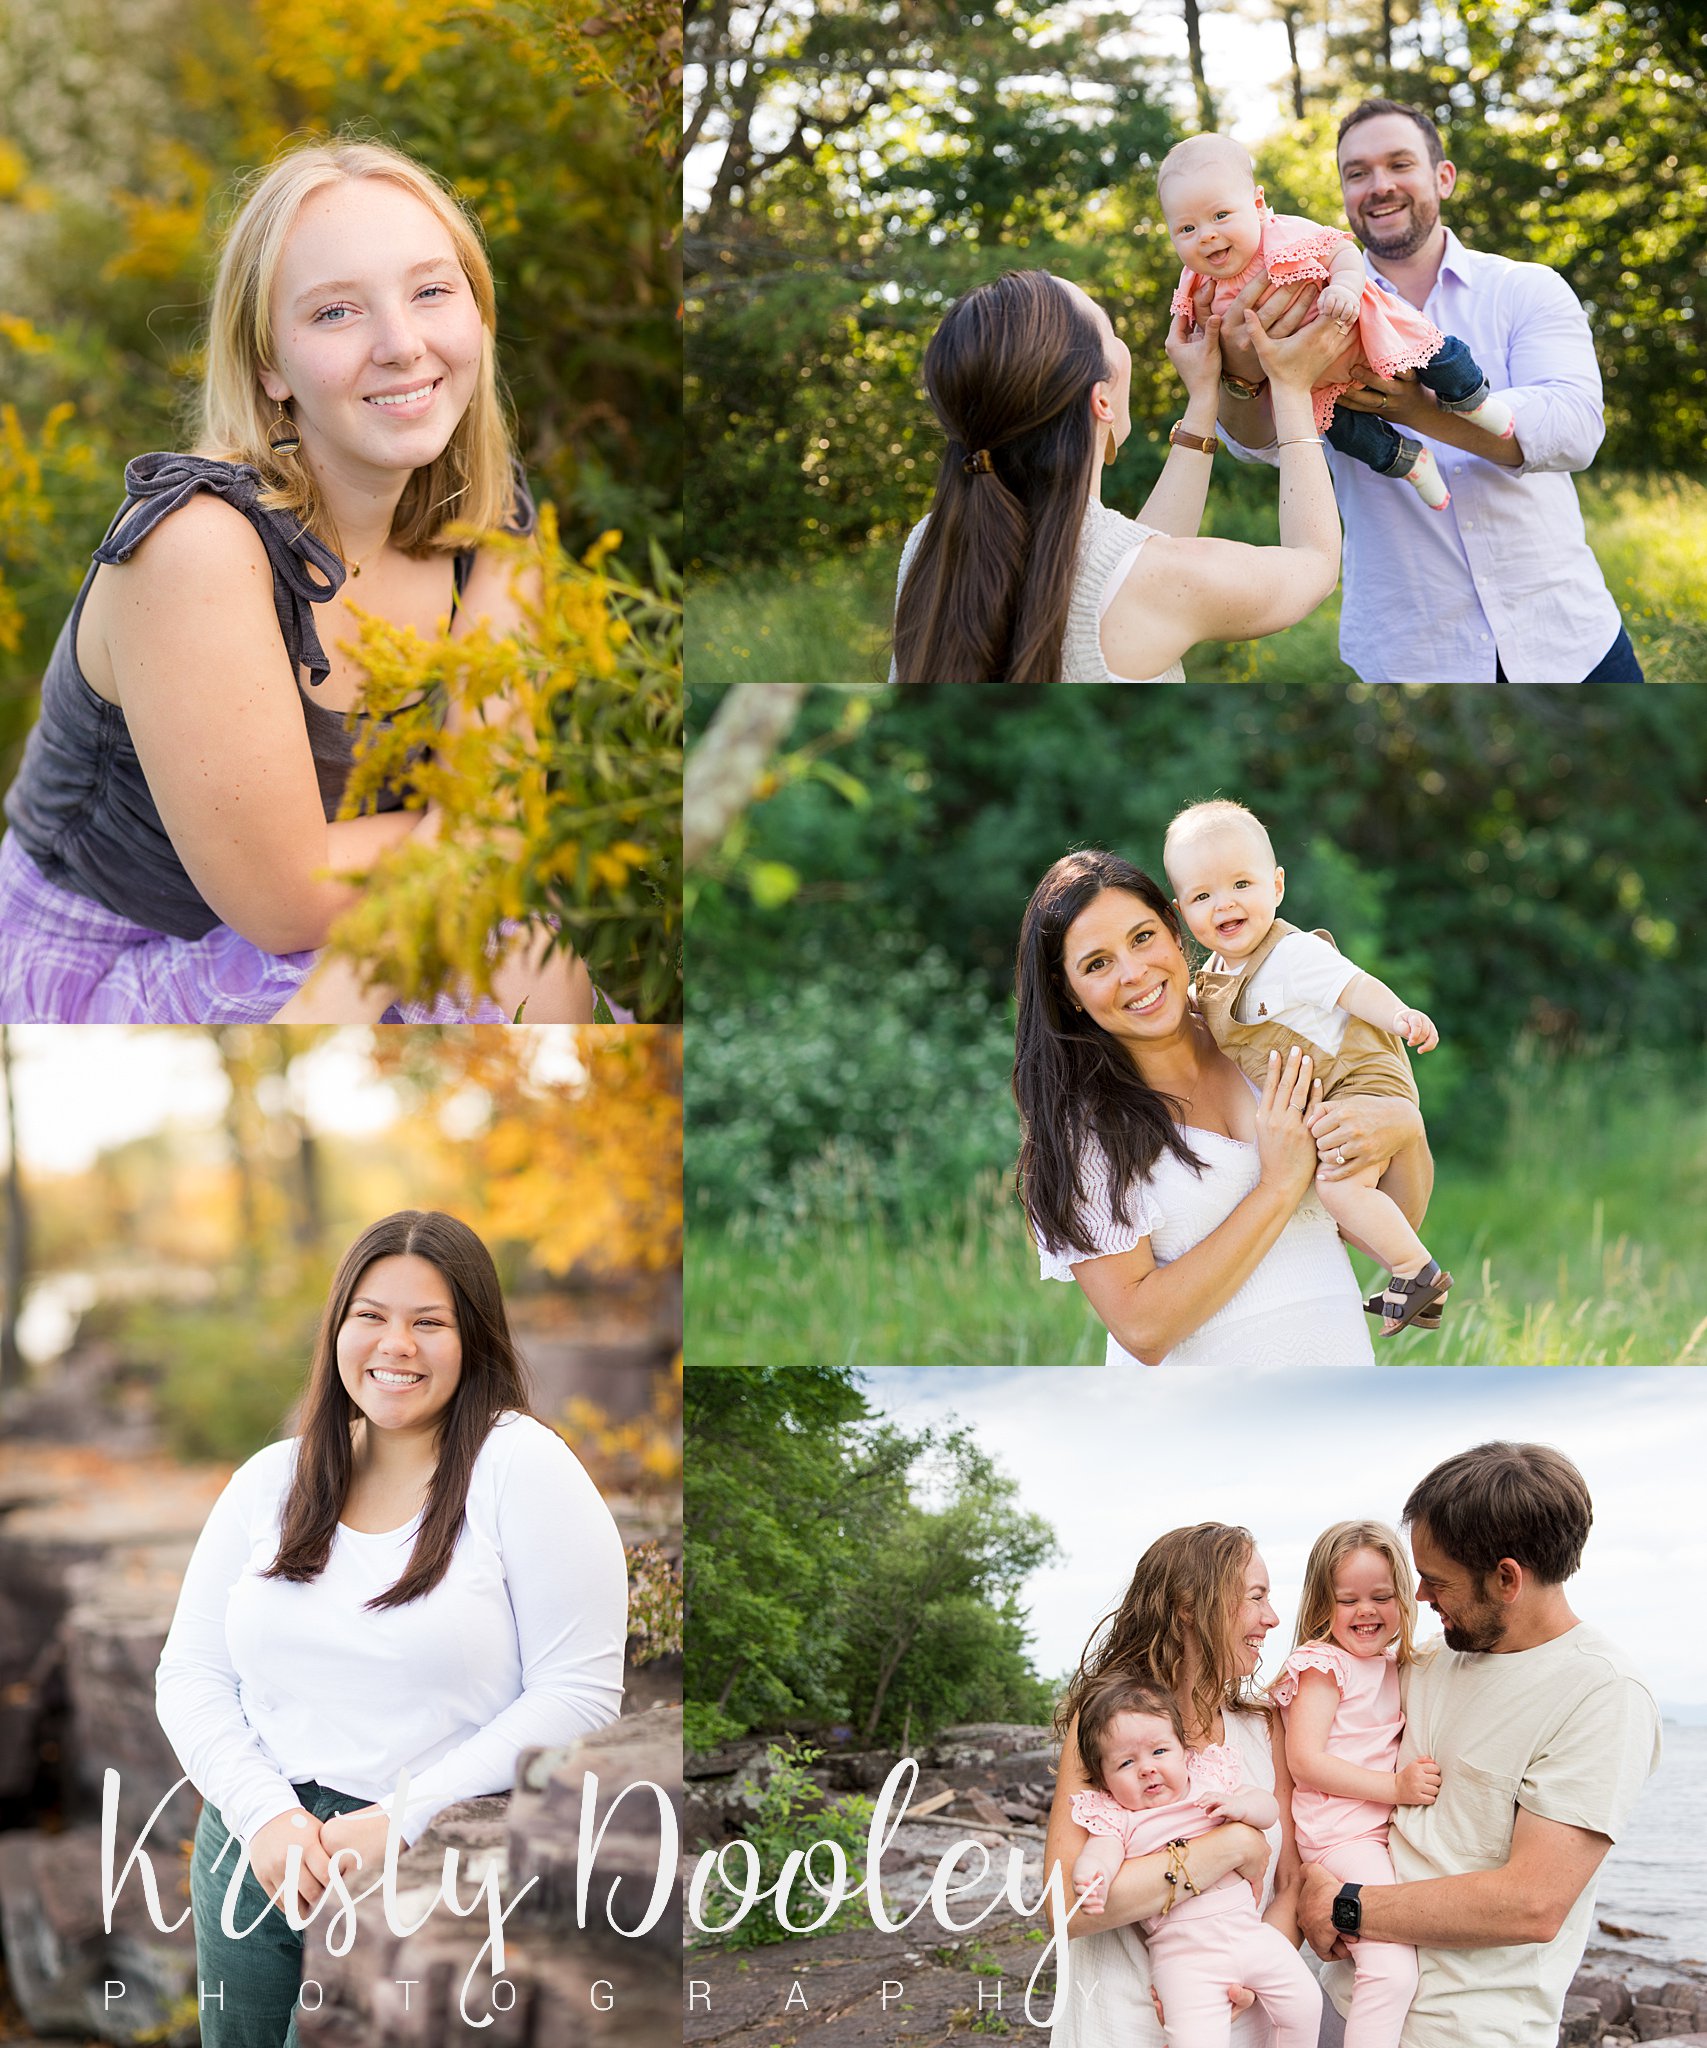 Kristy Dooley photography at Oakledge